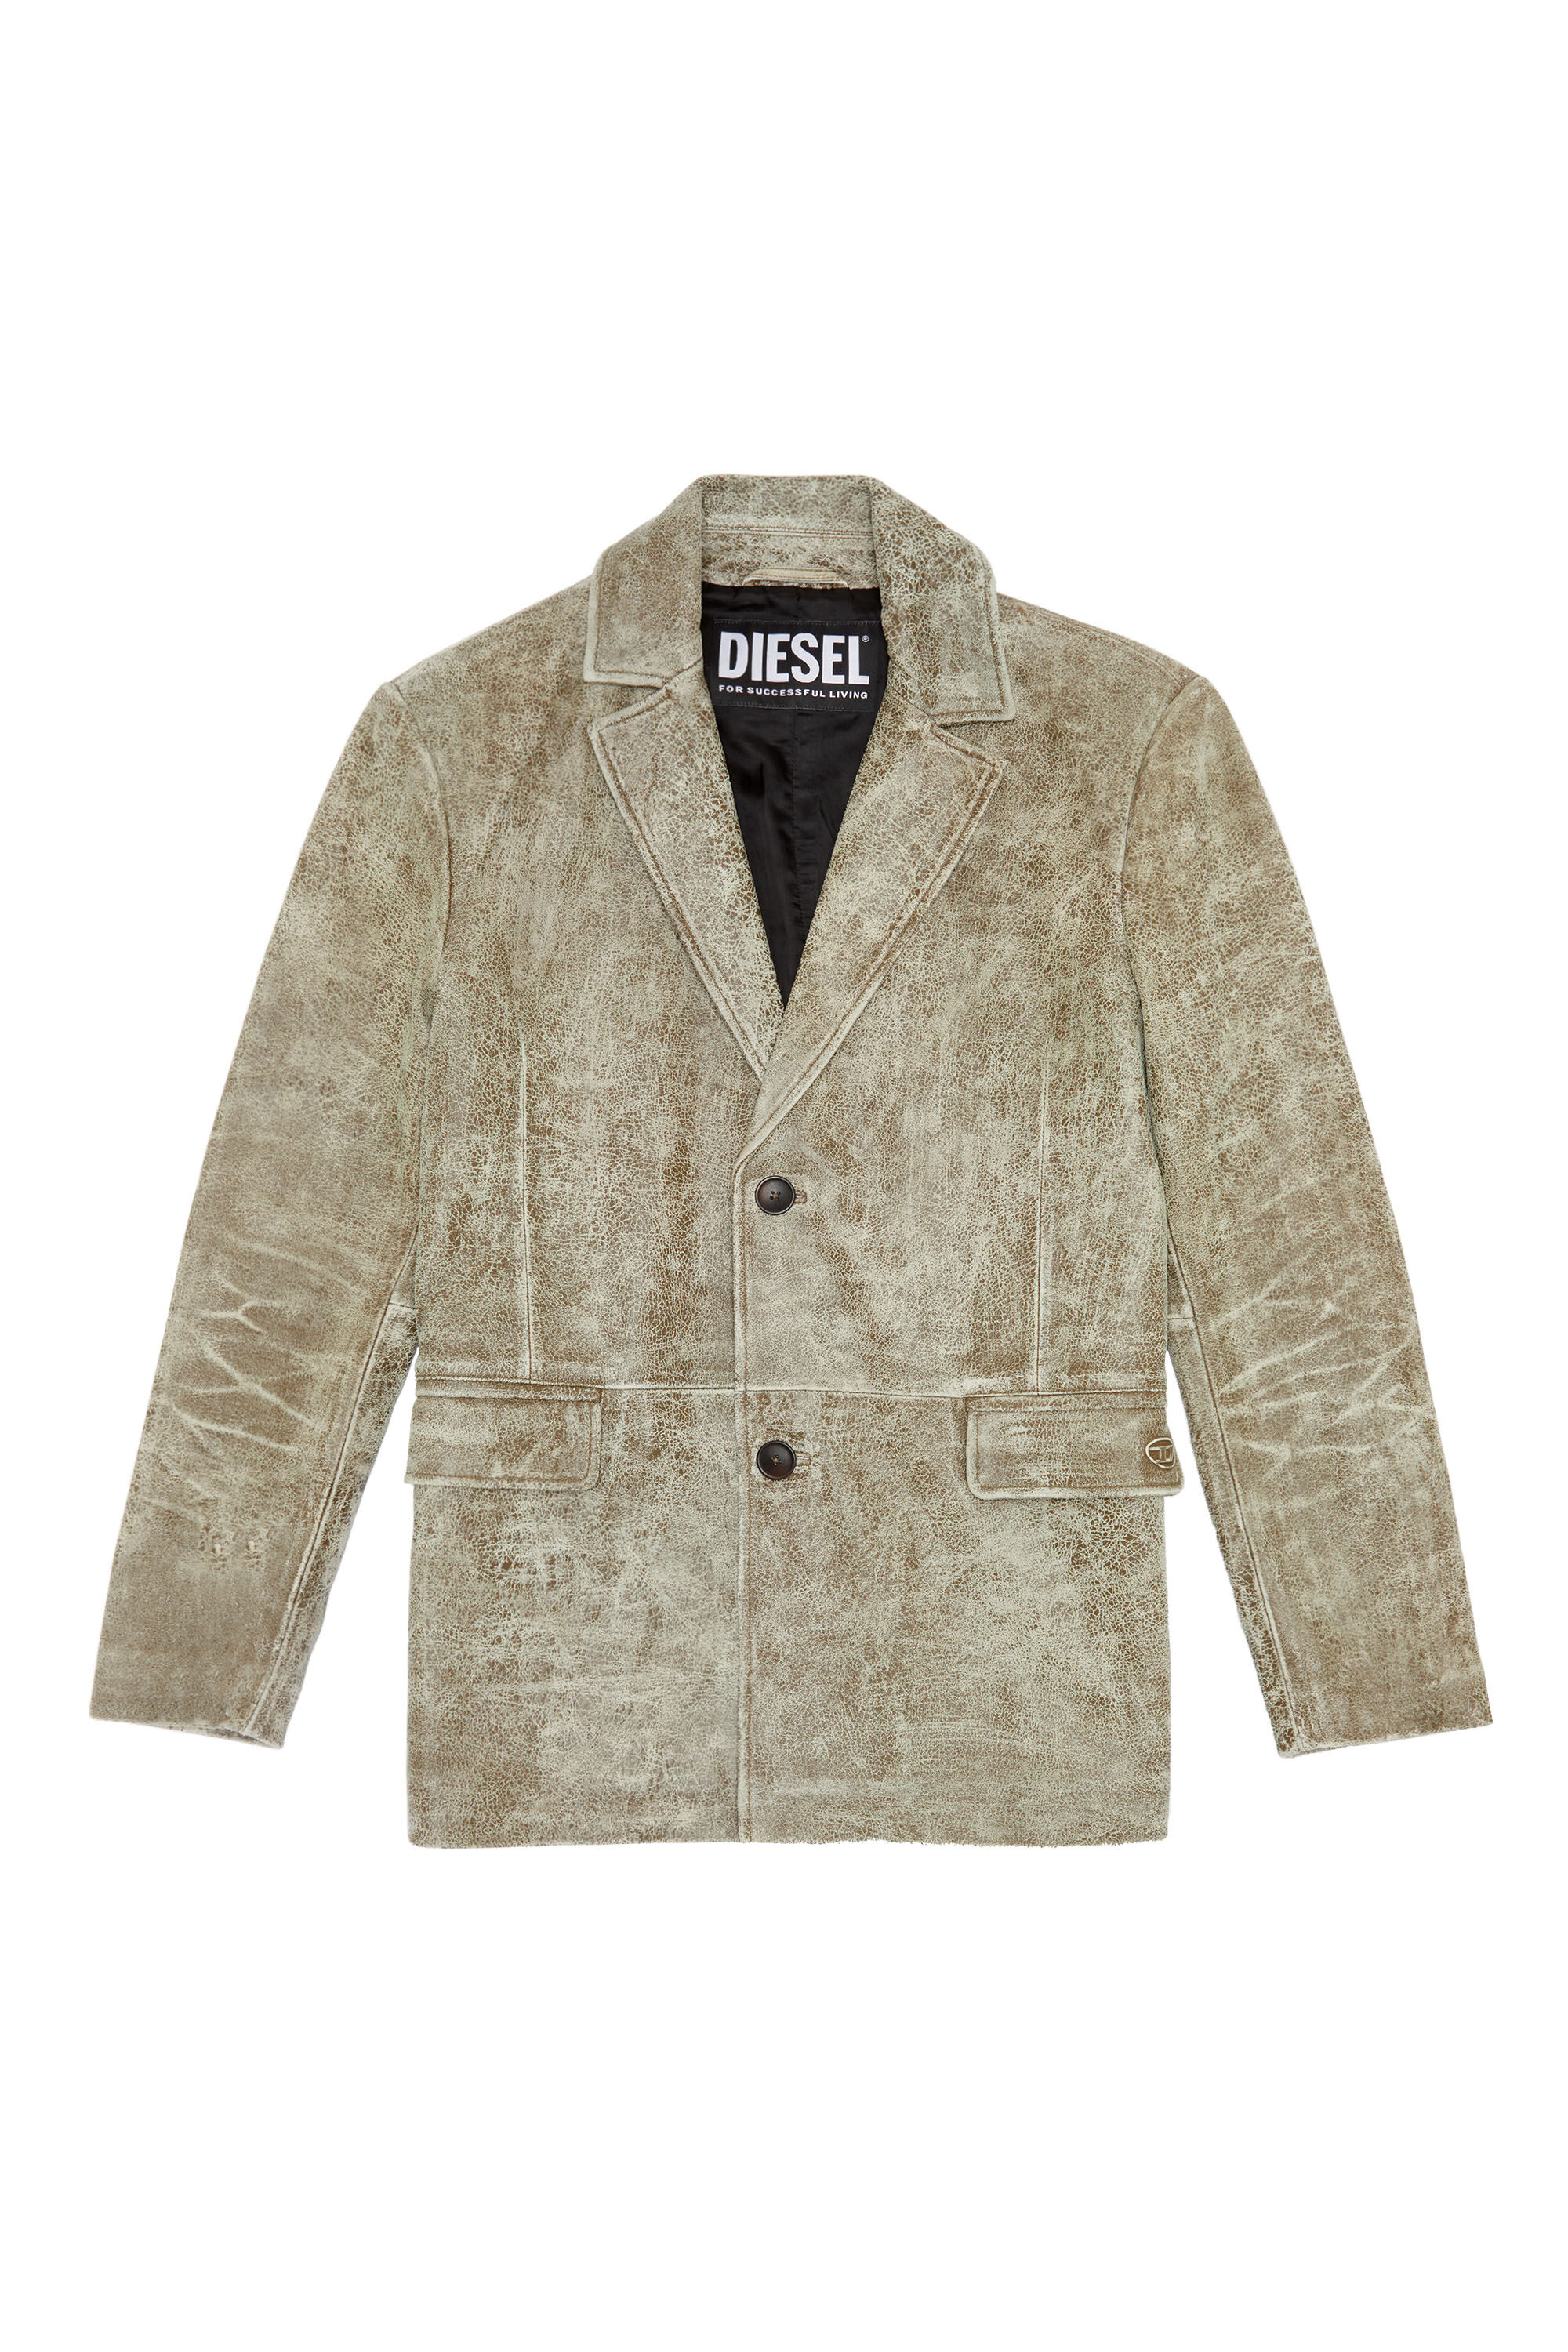 L-BLAZE : Tailored jacket in cracked leather | Diesel